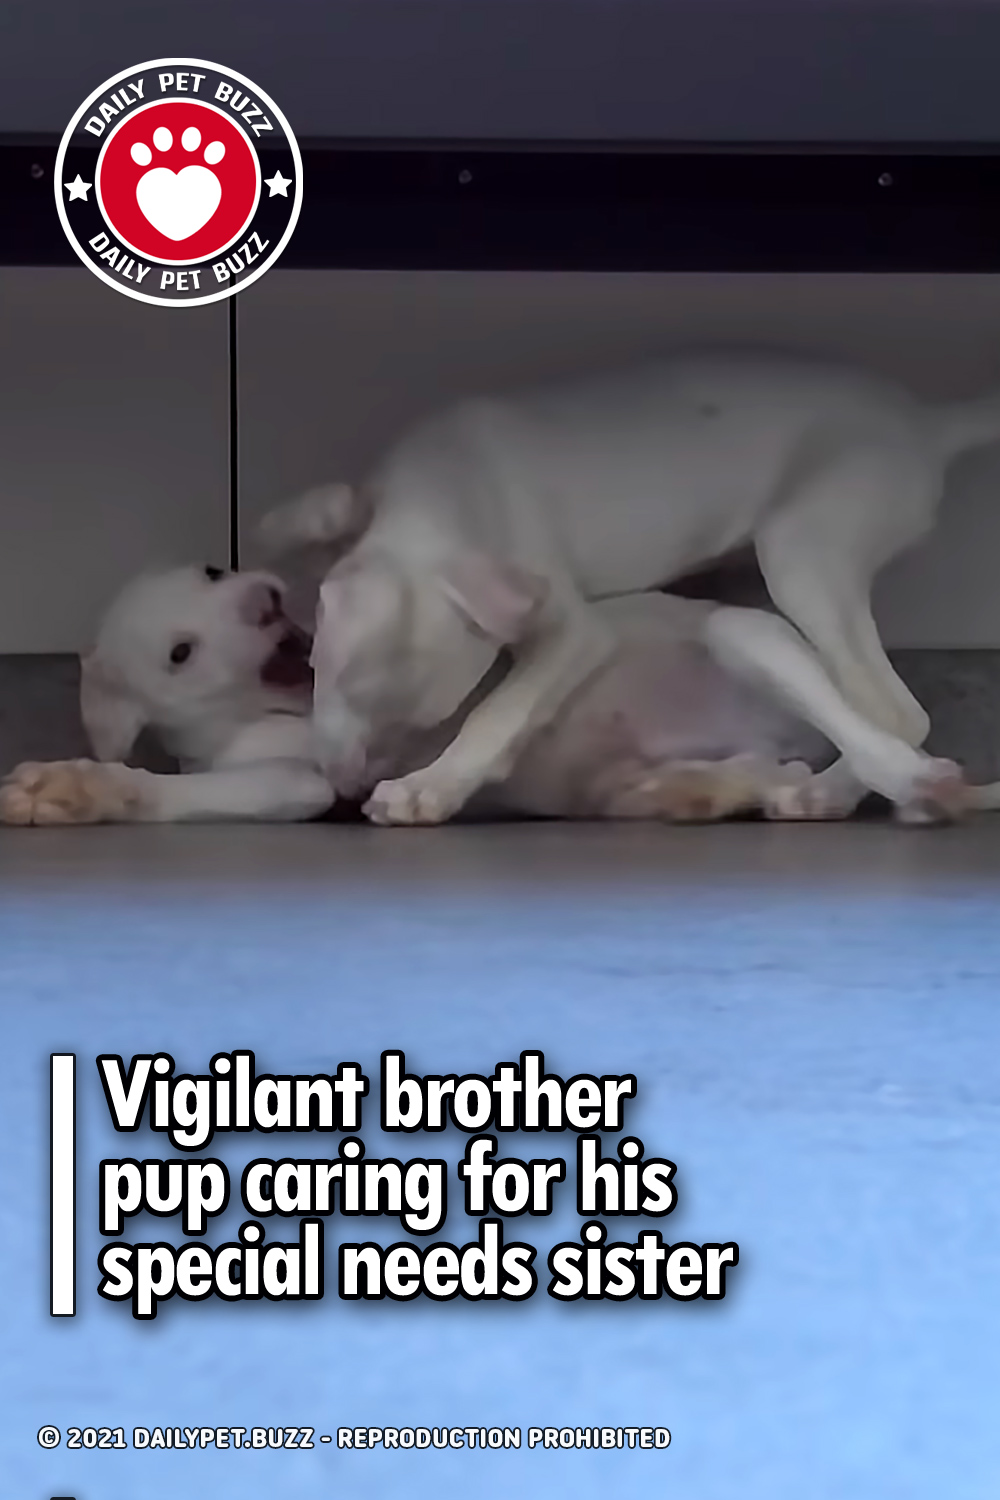 Vigilant brother pup caring for his special needs sister